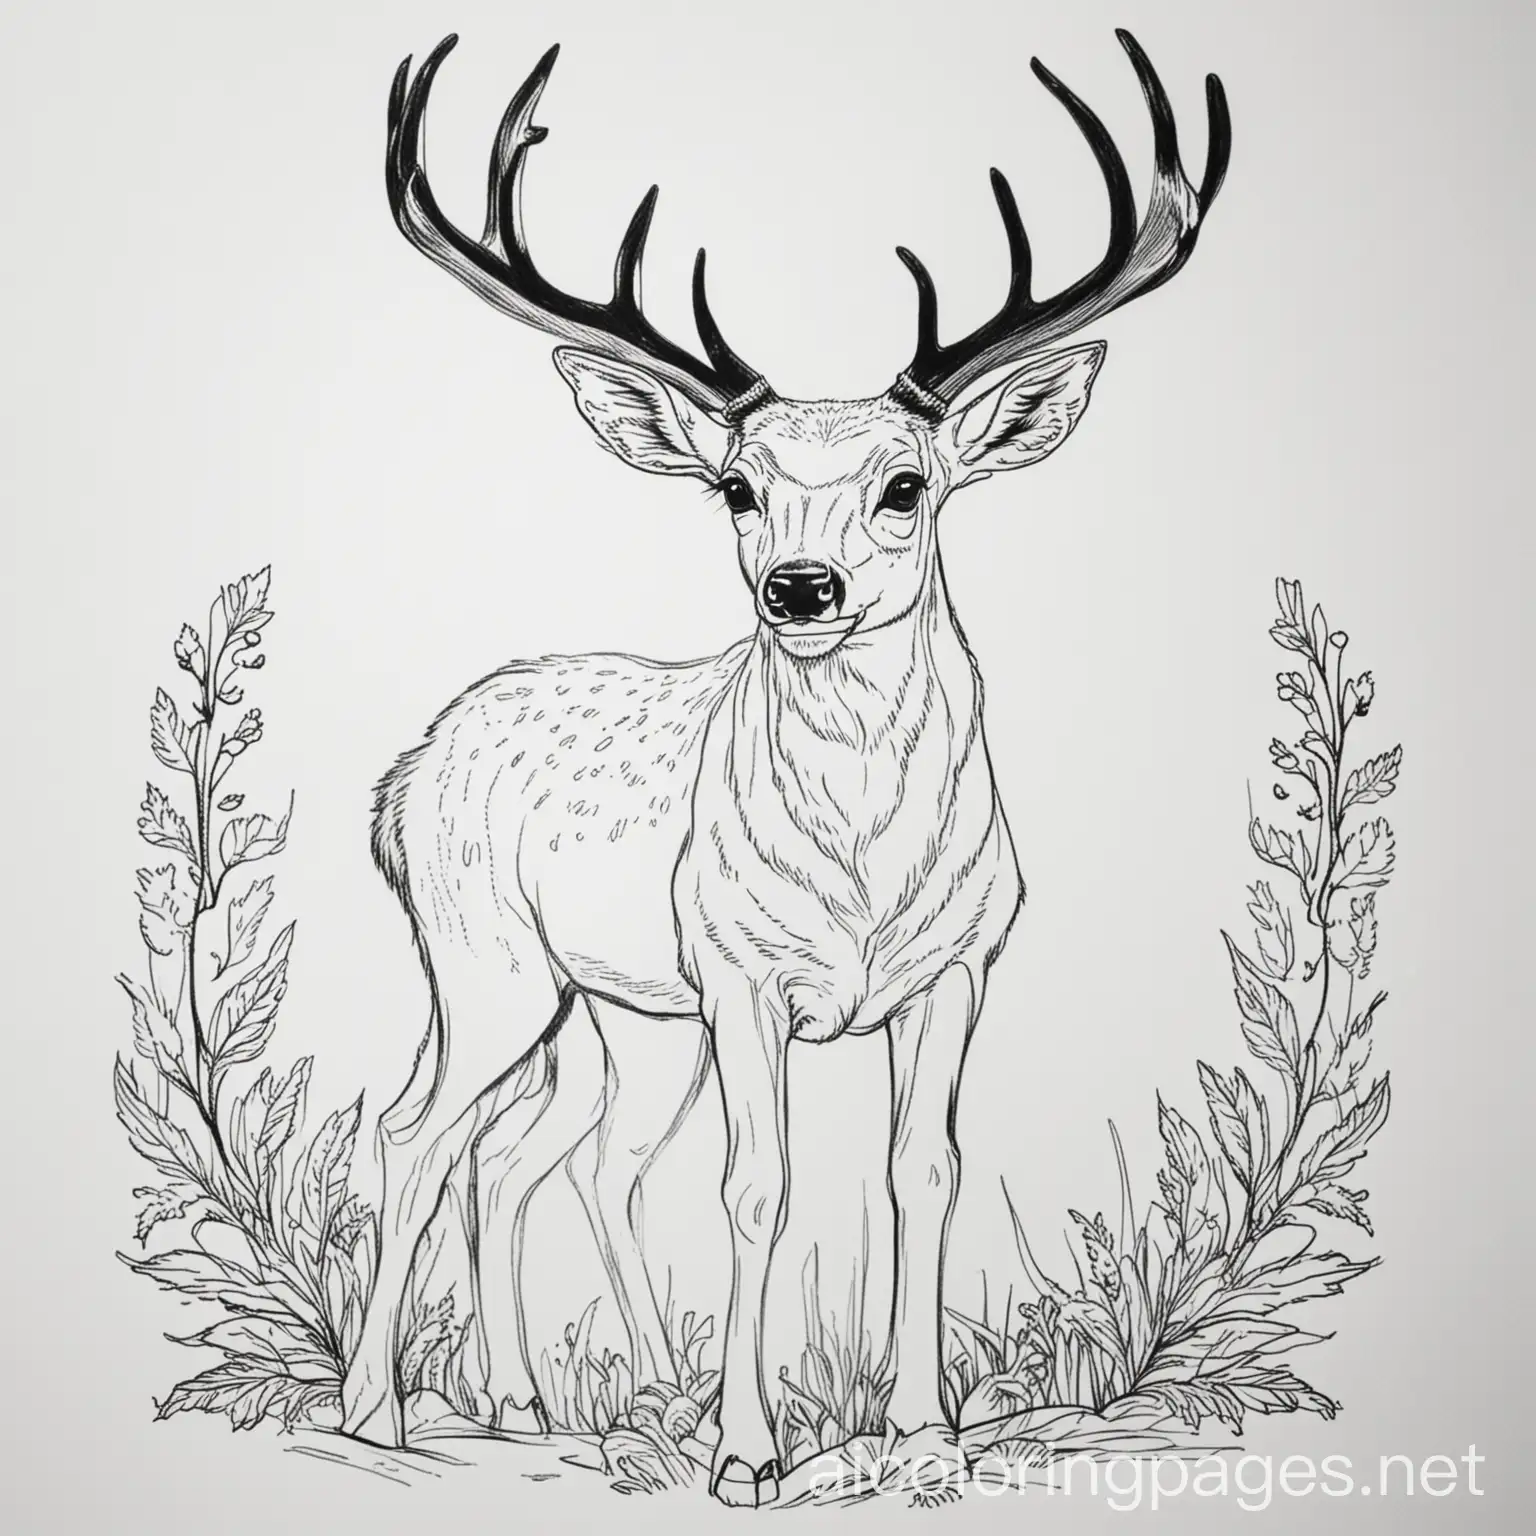 deer coloring page white background, black outline ,inner white , Coloring Page, black and white, line art, white background, Simplicity, Ample White Space